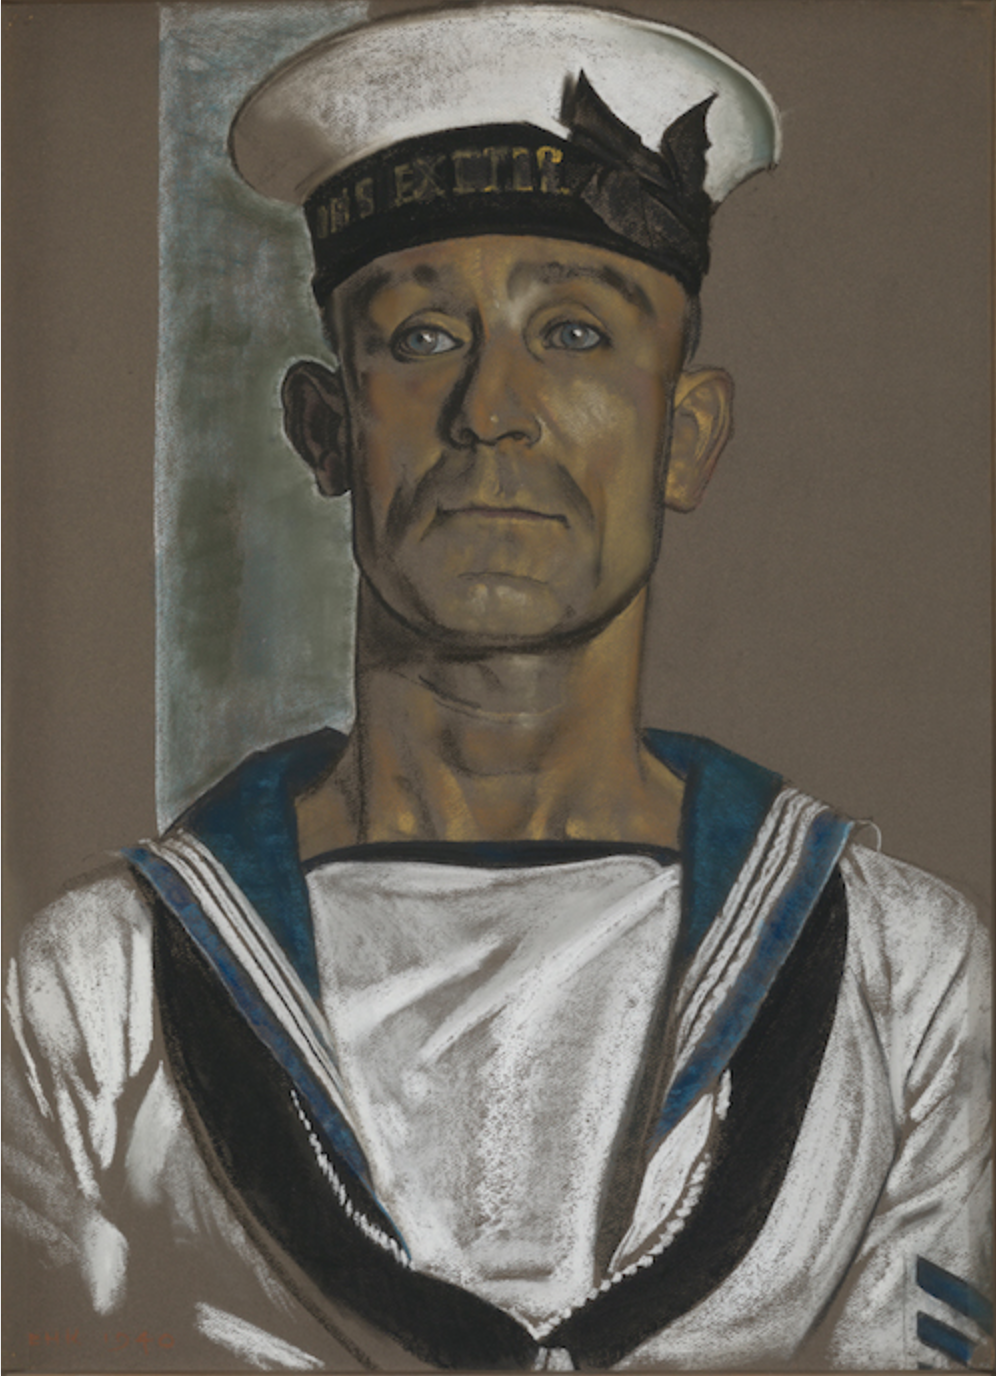 Eric Kennington, ‘Portrait of Stoker A. Martin of HMS Exeter,’ 1940, pastel on paper, 735 x 530 mm (29 x 20 7:8 in), National Martitime Museum, Greenwich, London. Note the large size of this portrait.